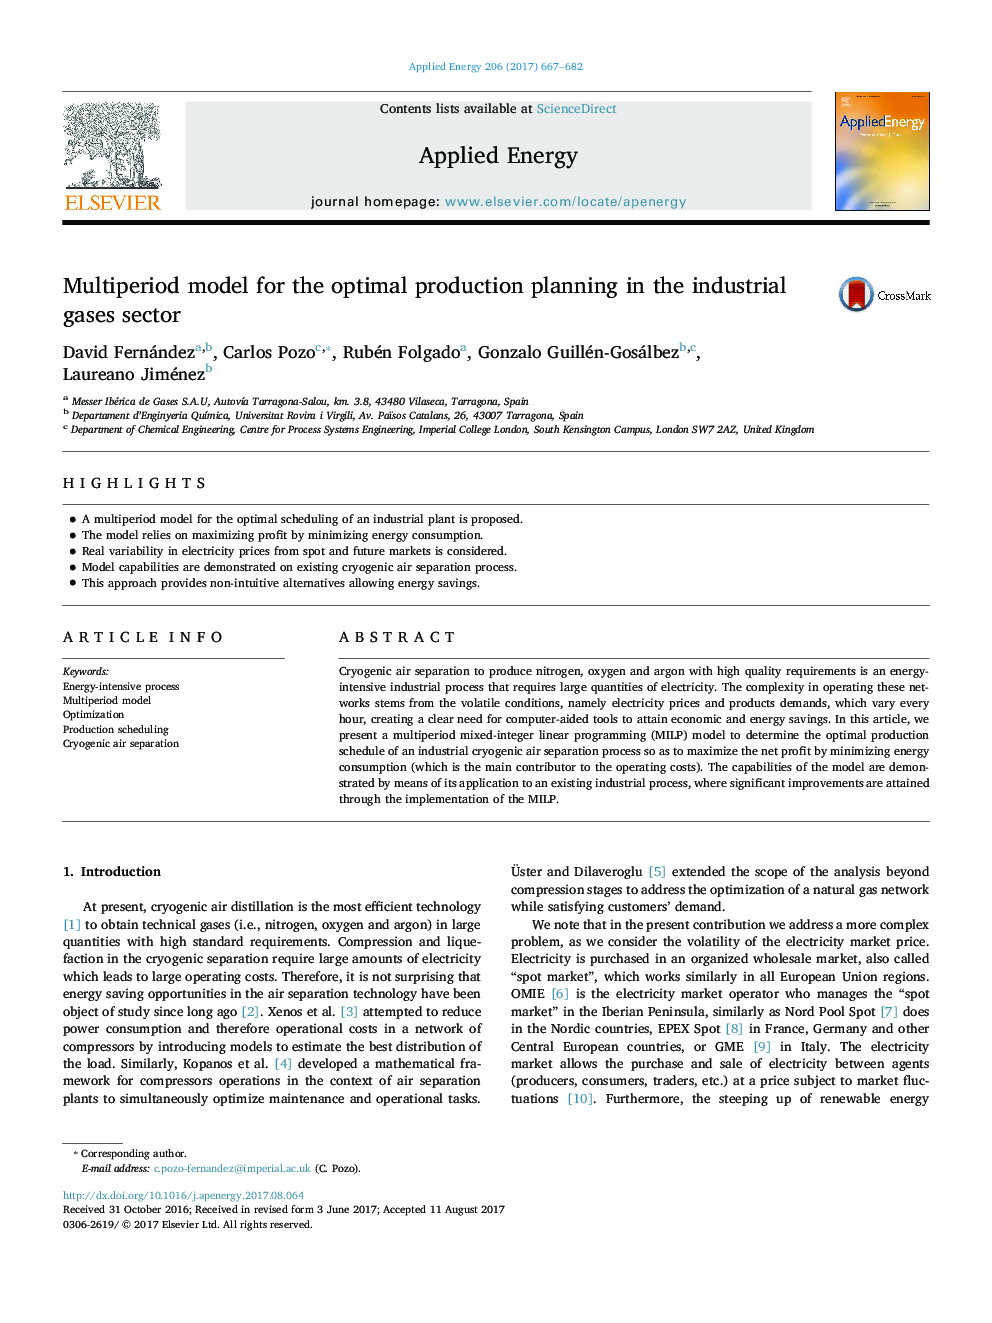 Multiperiod model for the optimal production planning in the industrial gases sector